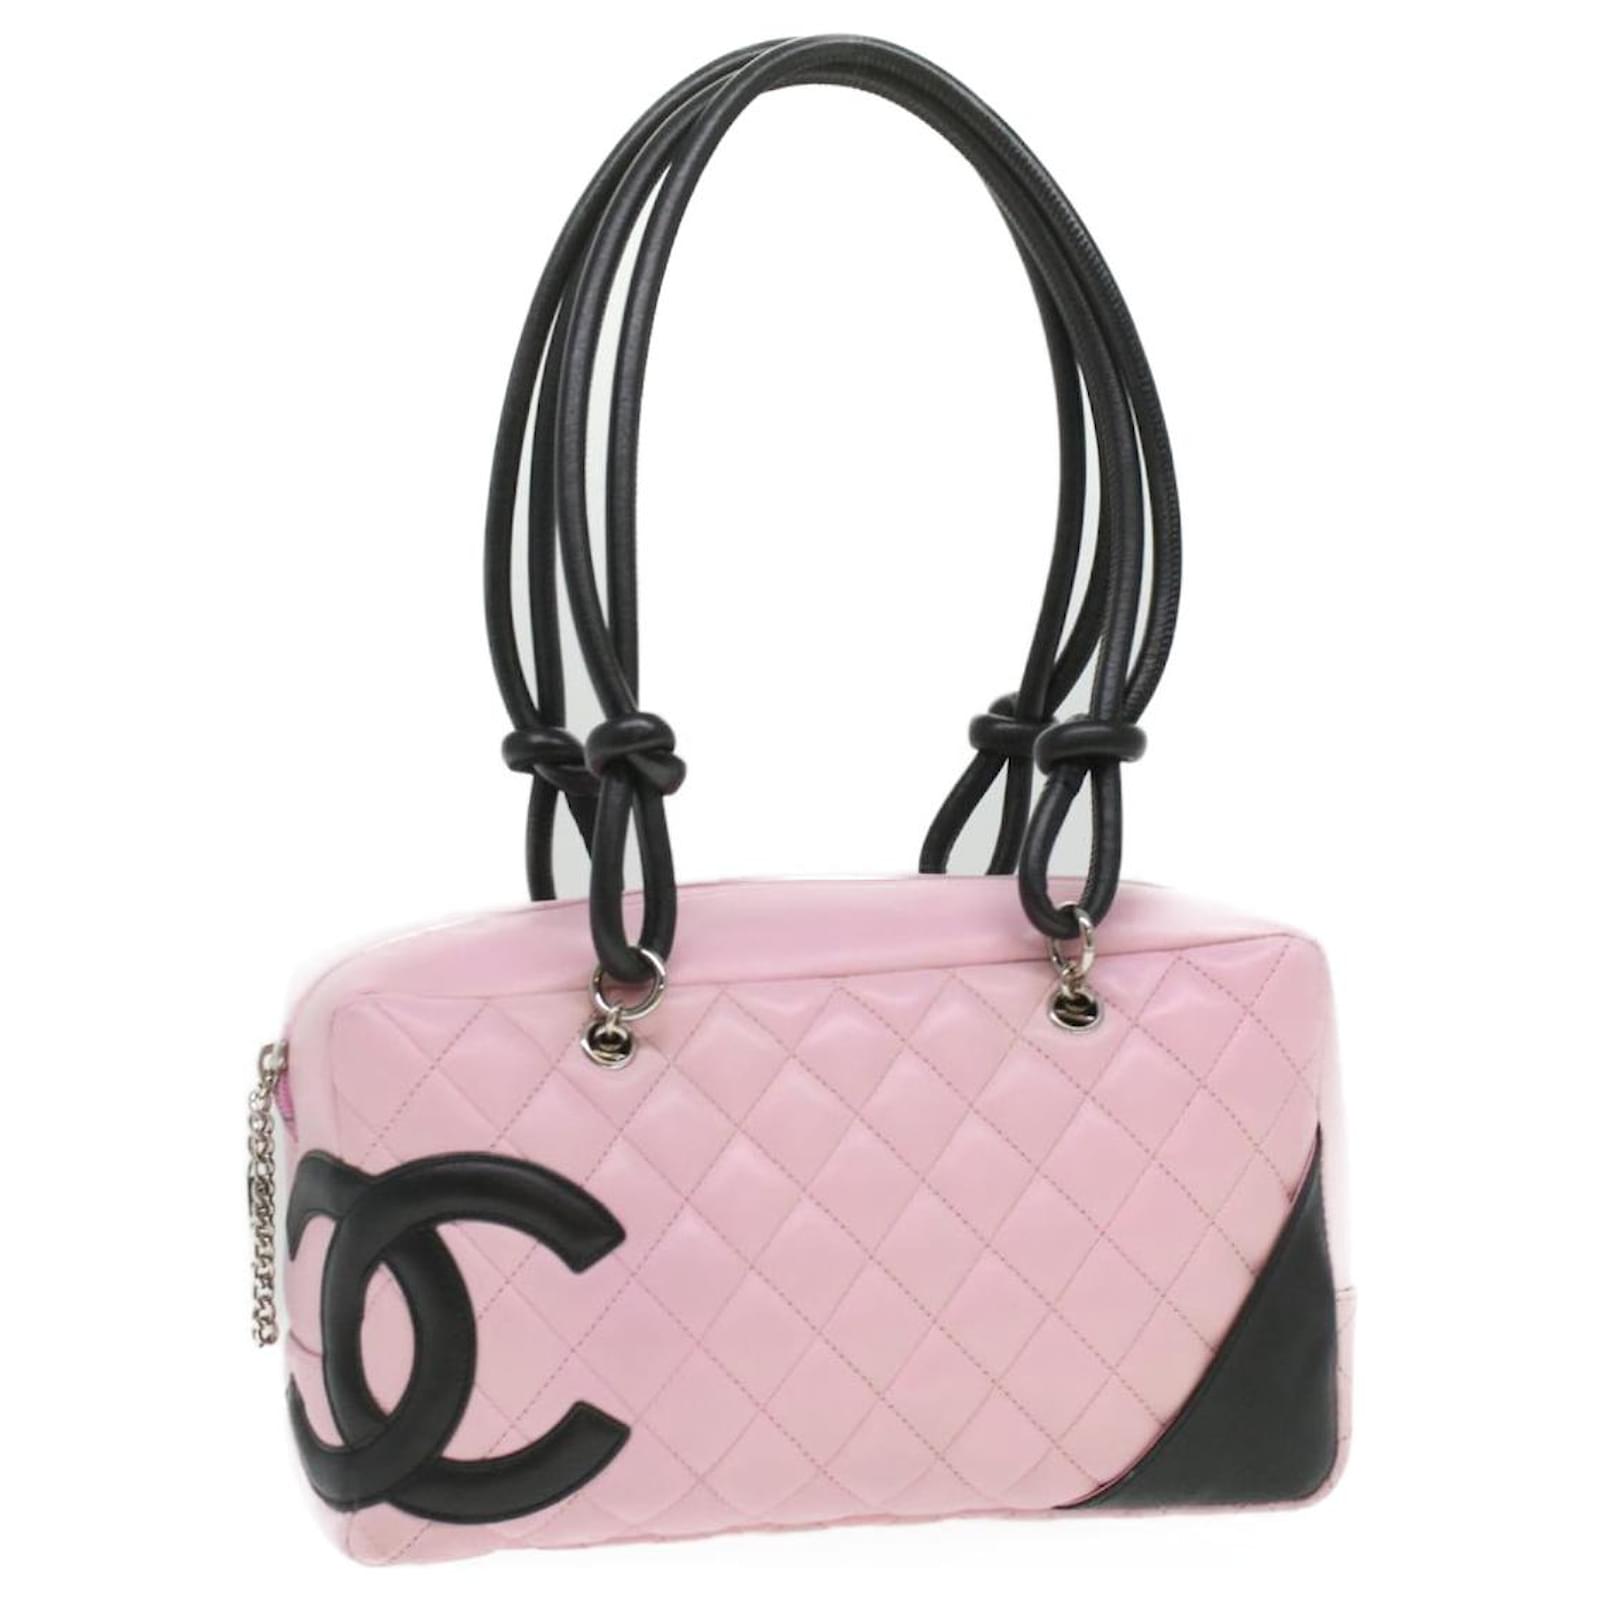 CHANEL, Bags, Chanel Cambon Nude Pink Black Cc Leather Tote Shoulder Bag